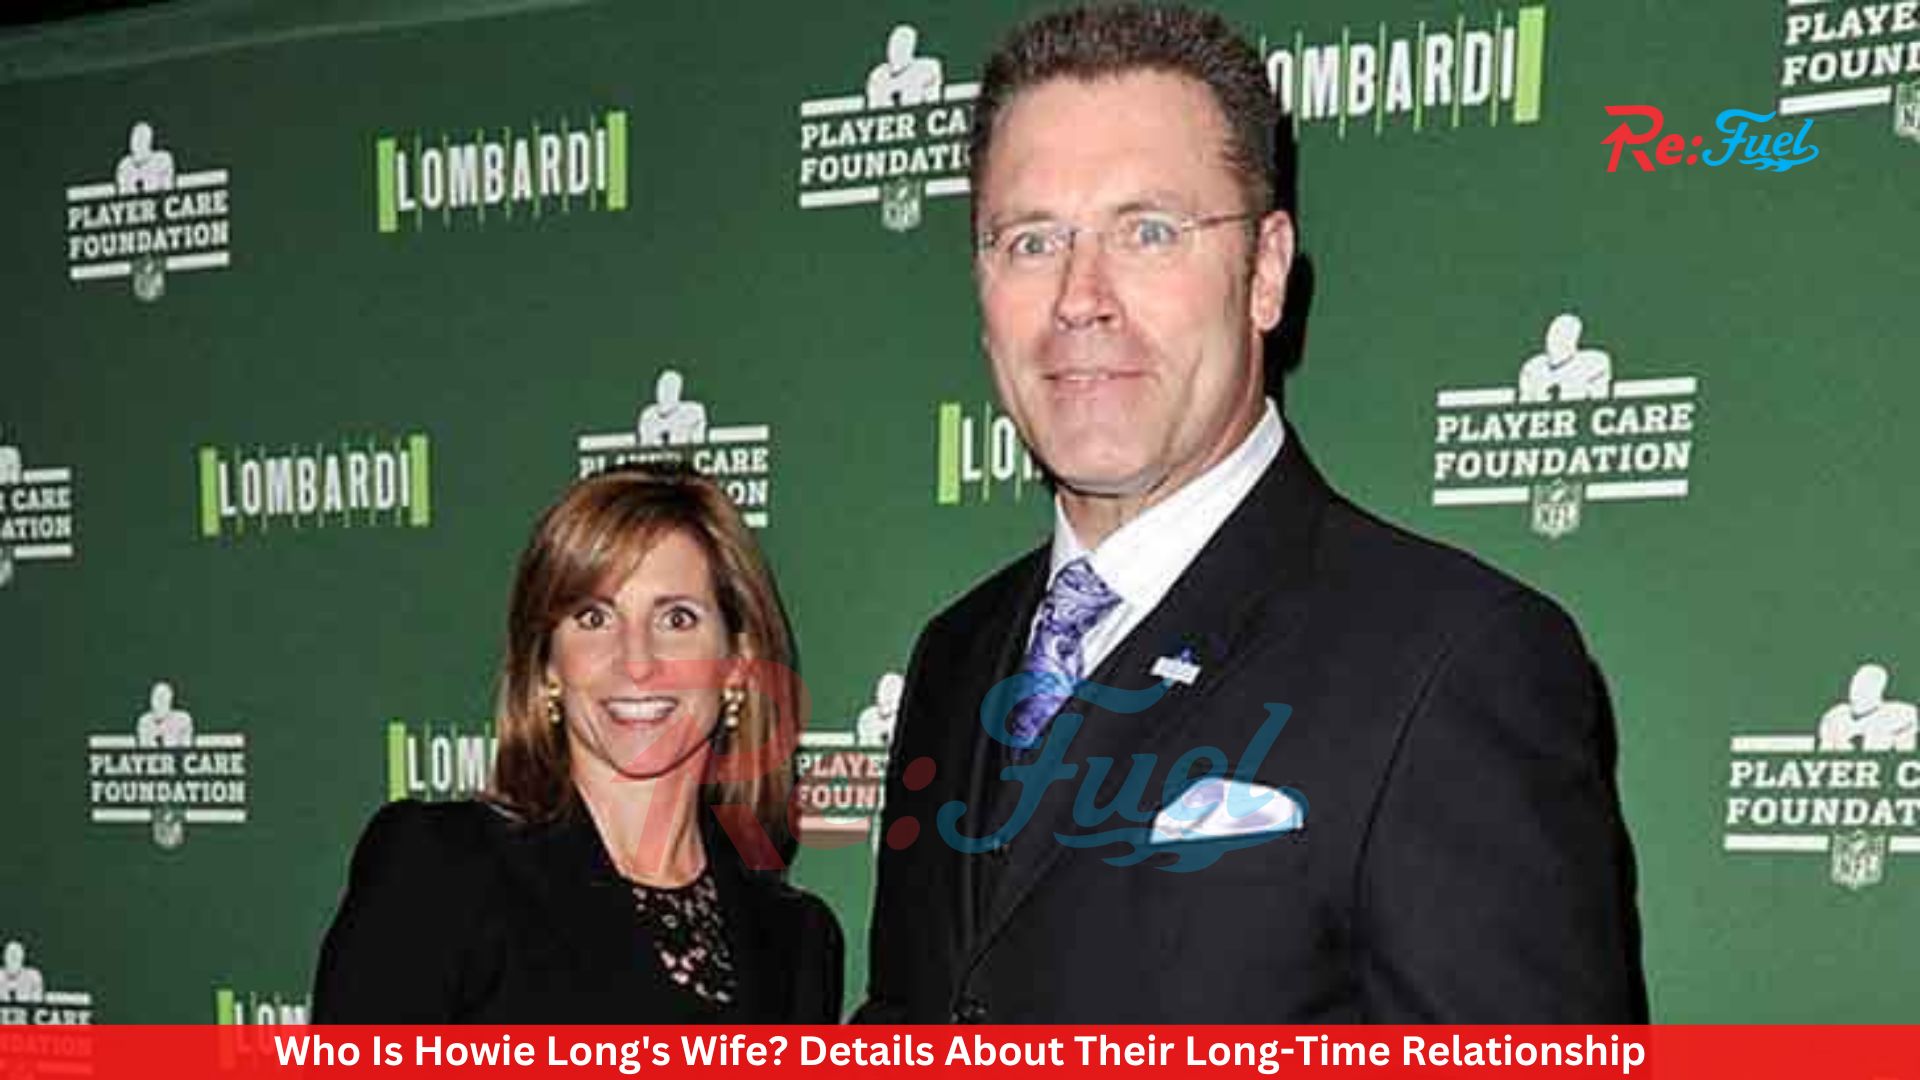 Who Is Howie Long's Wife? Details About Their Long-Time Relationship